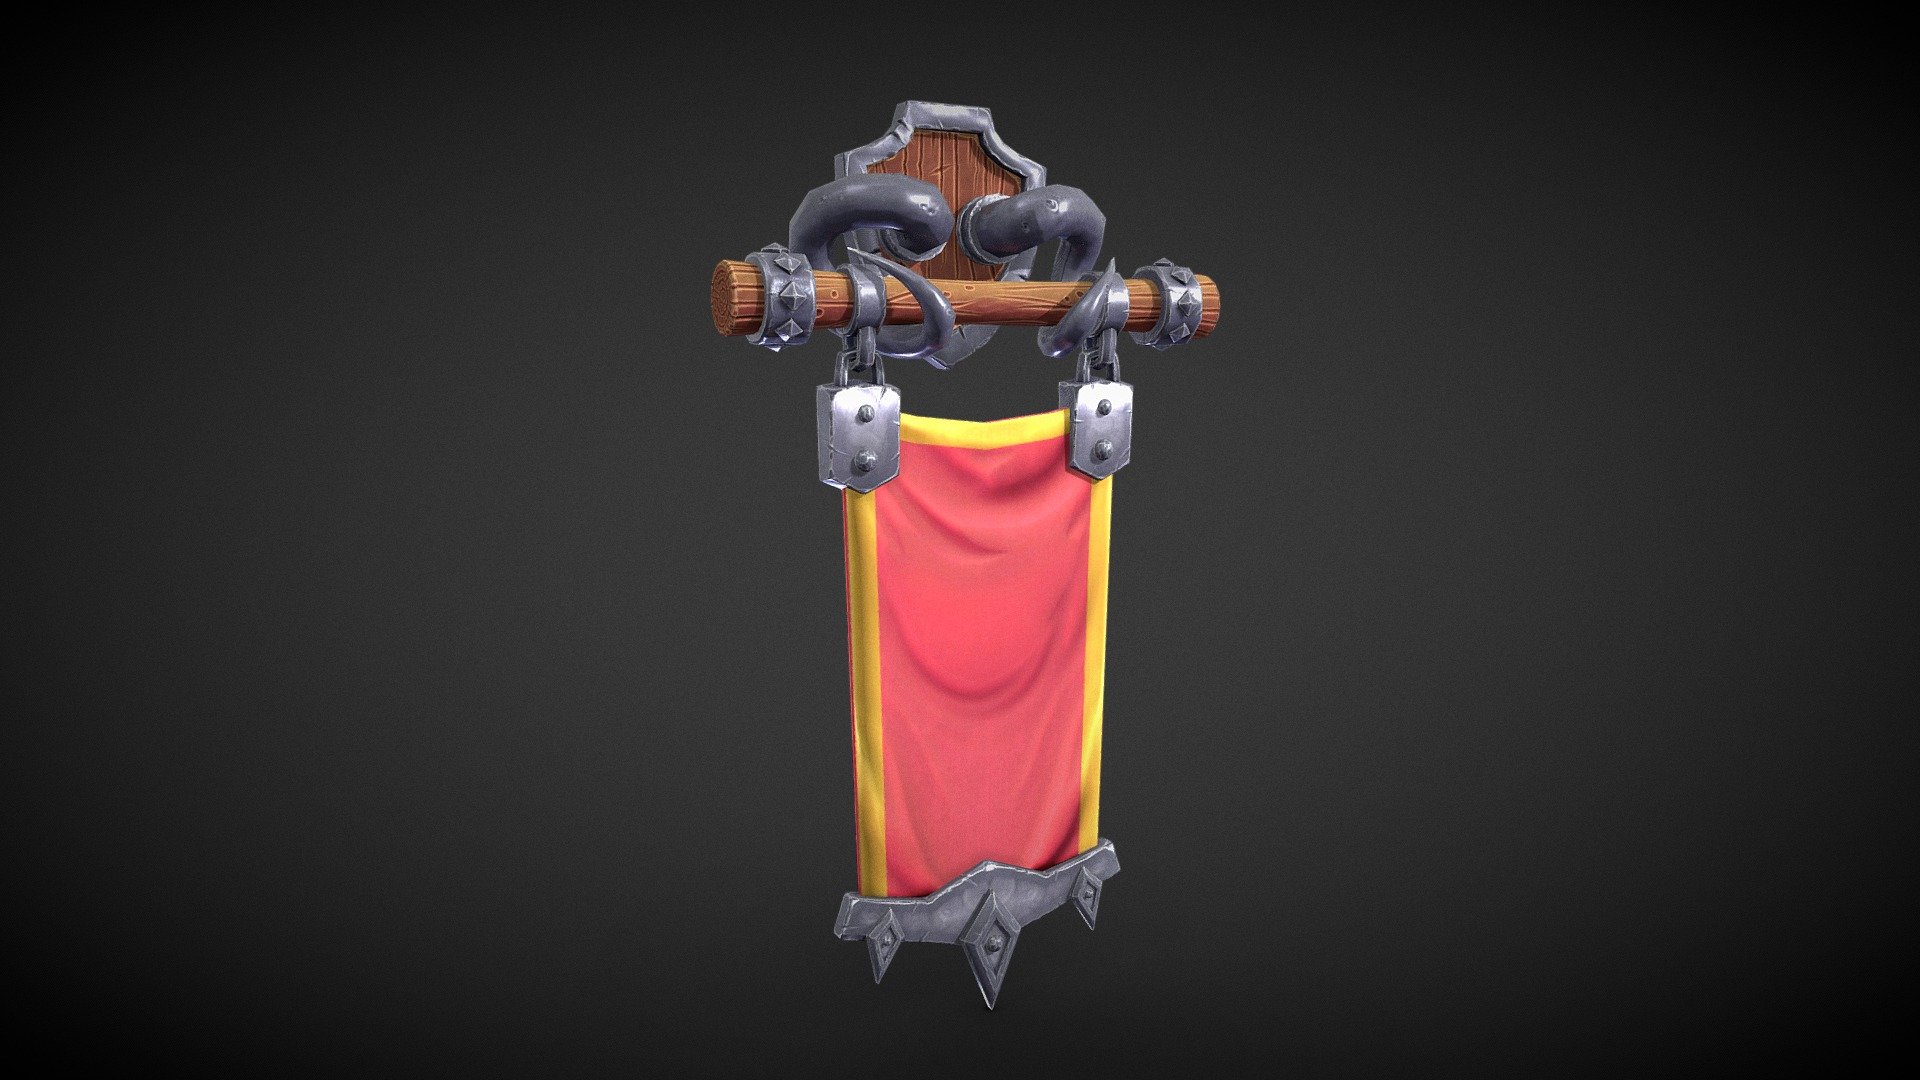 Experimental stylized and fantasy banner model. Tried to keep it medieval-like but also more stylized.

Modeled in Blender
Sculpted in ZBrush
Textured in Substance :) - Fantasy Stylized Banner - 3D model by Burak Özcan (@ozcanburak8) 3d model